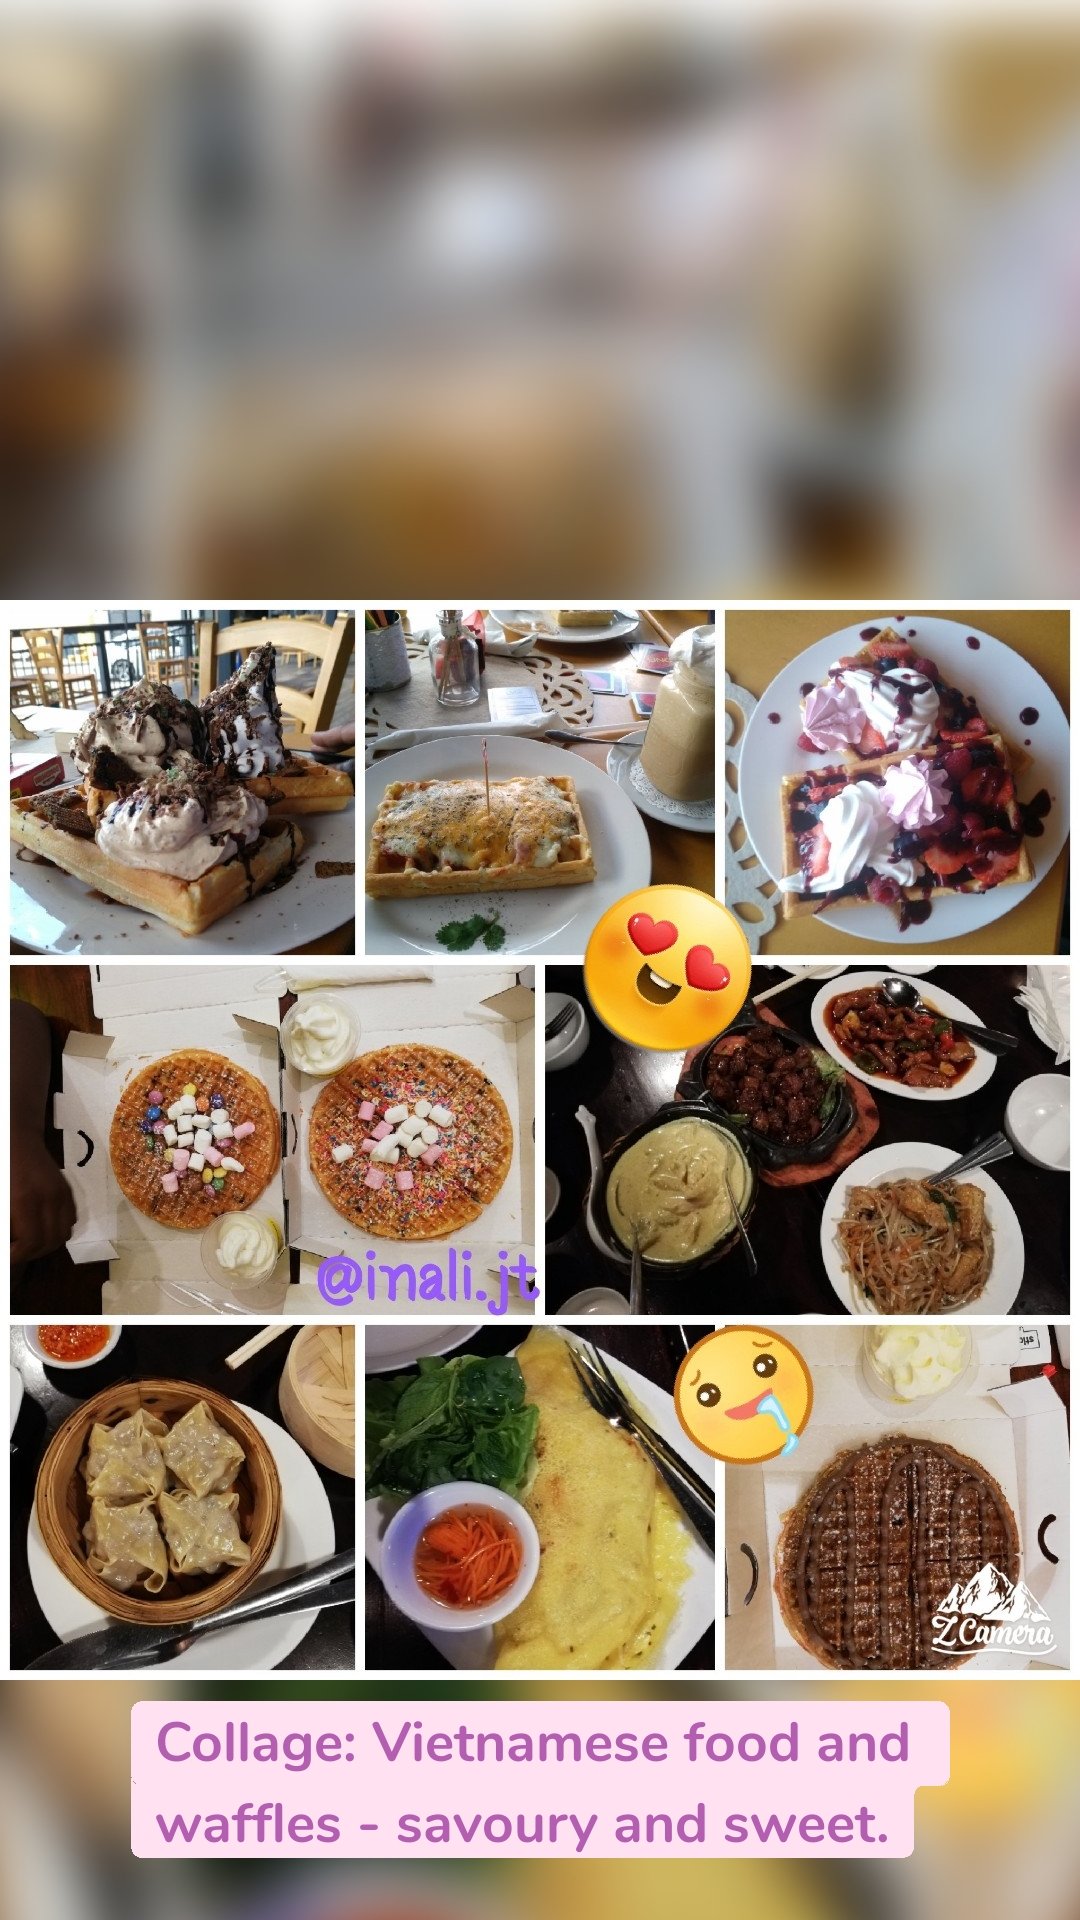 Collage: Vietnamese food and waffles - savoury and sweet.